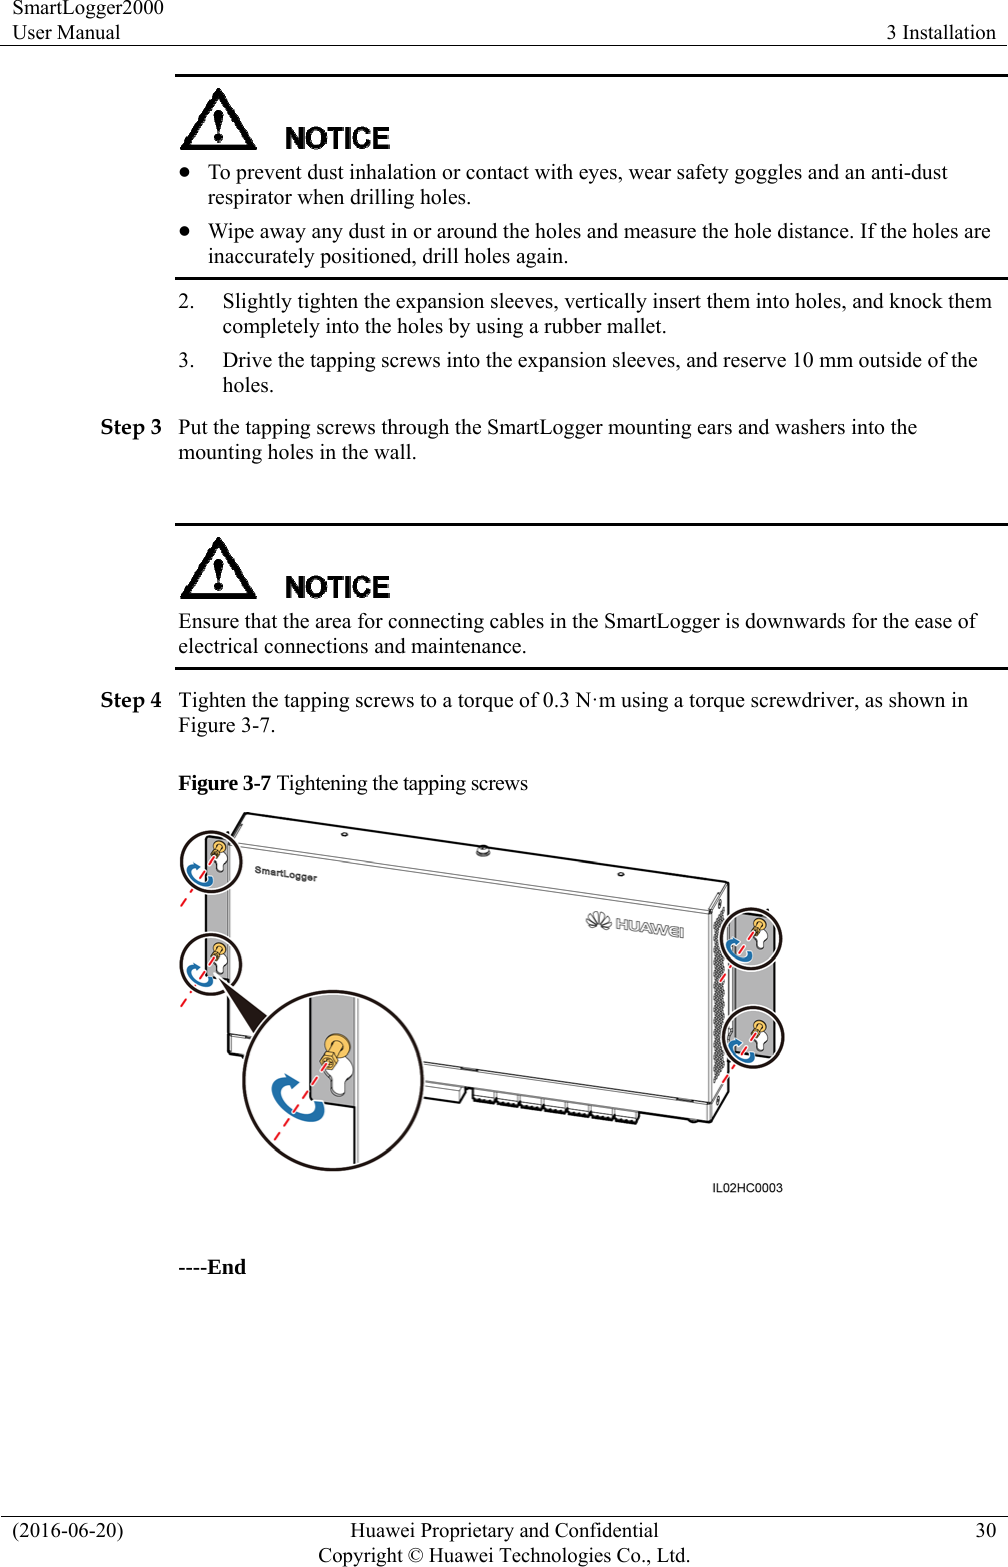 SmartLogger2000 User Manual  3 Installation (2016-06-20)  Huawei Proprietary and Confidential         Copyright © Huawei Technologies Co., Ltd.30   To prevent dust inhalation or contact with eyes, wear safety goggles and an anti-dust respirator when drilling holes.  Wipe away any dust in or around the holes and measure the hole distance. If the holes are inaccurately positioned, drill holes again. 2. Slightly tighten the expansion sleeves, vertically insert them into holes, and knock them completely into the holes by using a rubber mallet.   3. Drive the tapping screws into the expansion sleeves, and reserve 10 mm outside of the holes.  Step 3 Put the tapping screws through the SmartLogger mounting ears and washers into the mounting holes in the wall.     Ensure that the area for connecting cables in the SmartLogger is downwards for the ease of electrical connections and maintenance. Step 4 Tighten the tapping screws to a torque of 0.3 N·m using a torque screwdriver, as shown in Figure 3-7. Figure 3-7 Tightening the tapping screws   ----End 